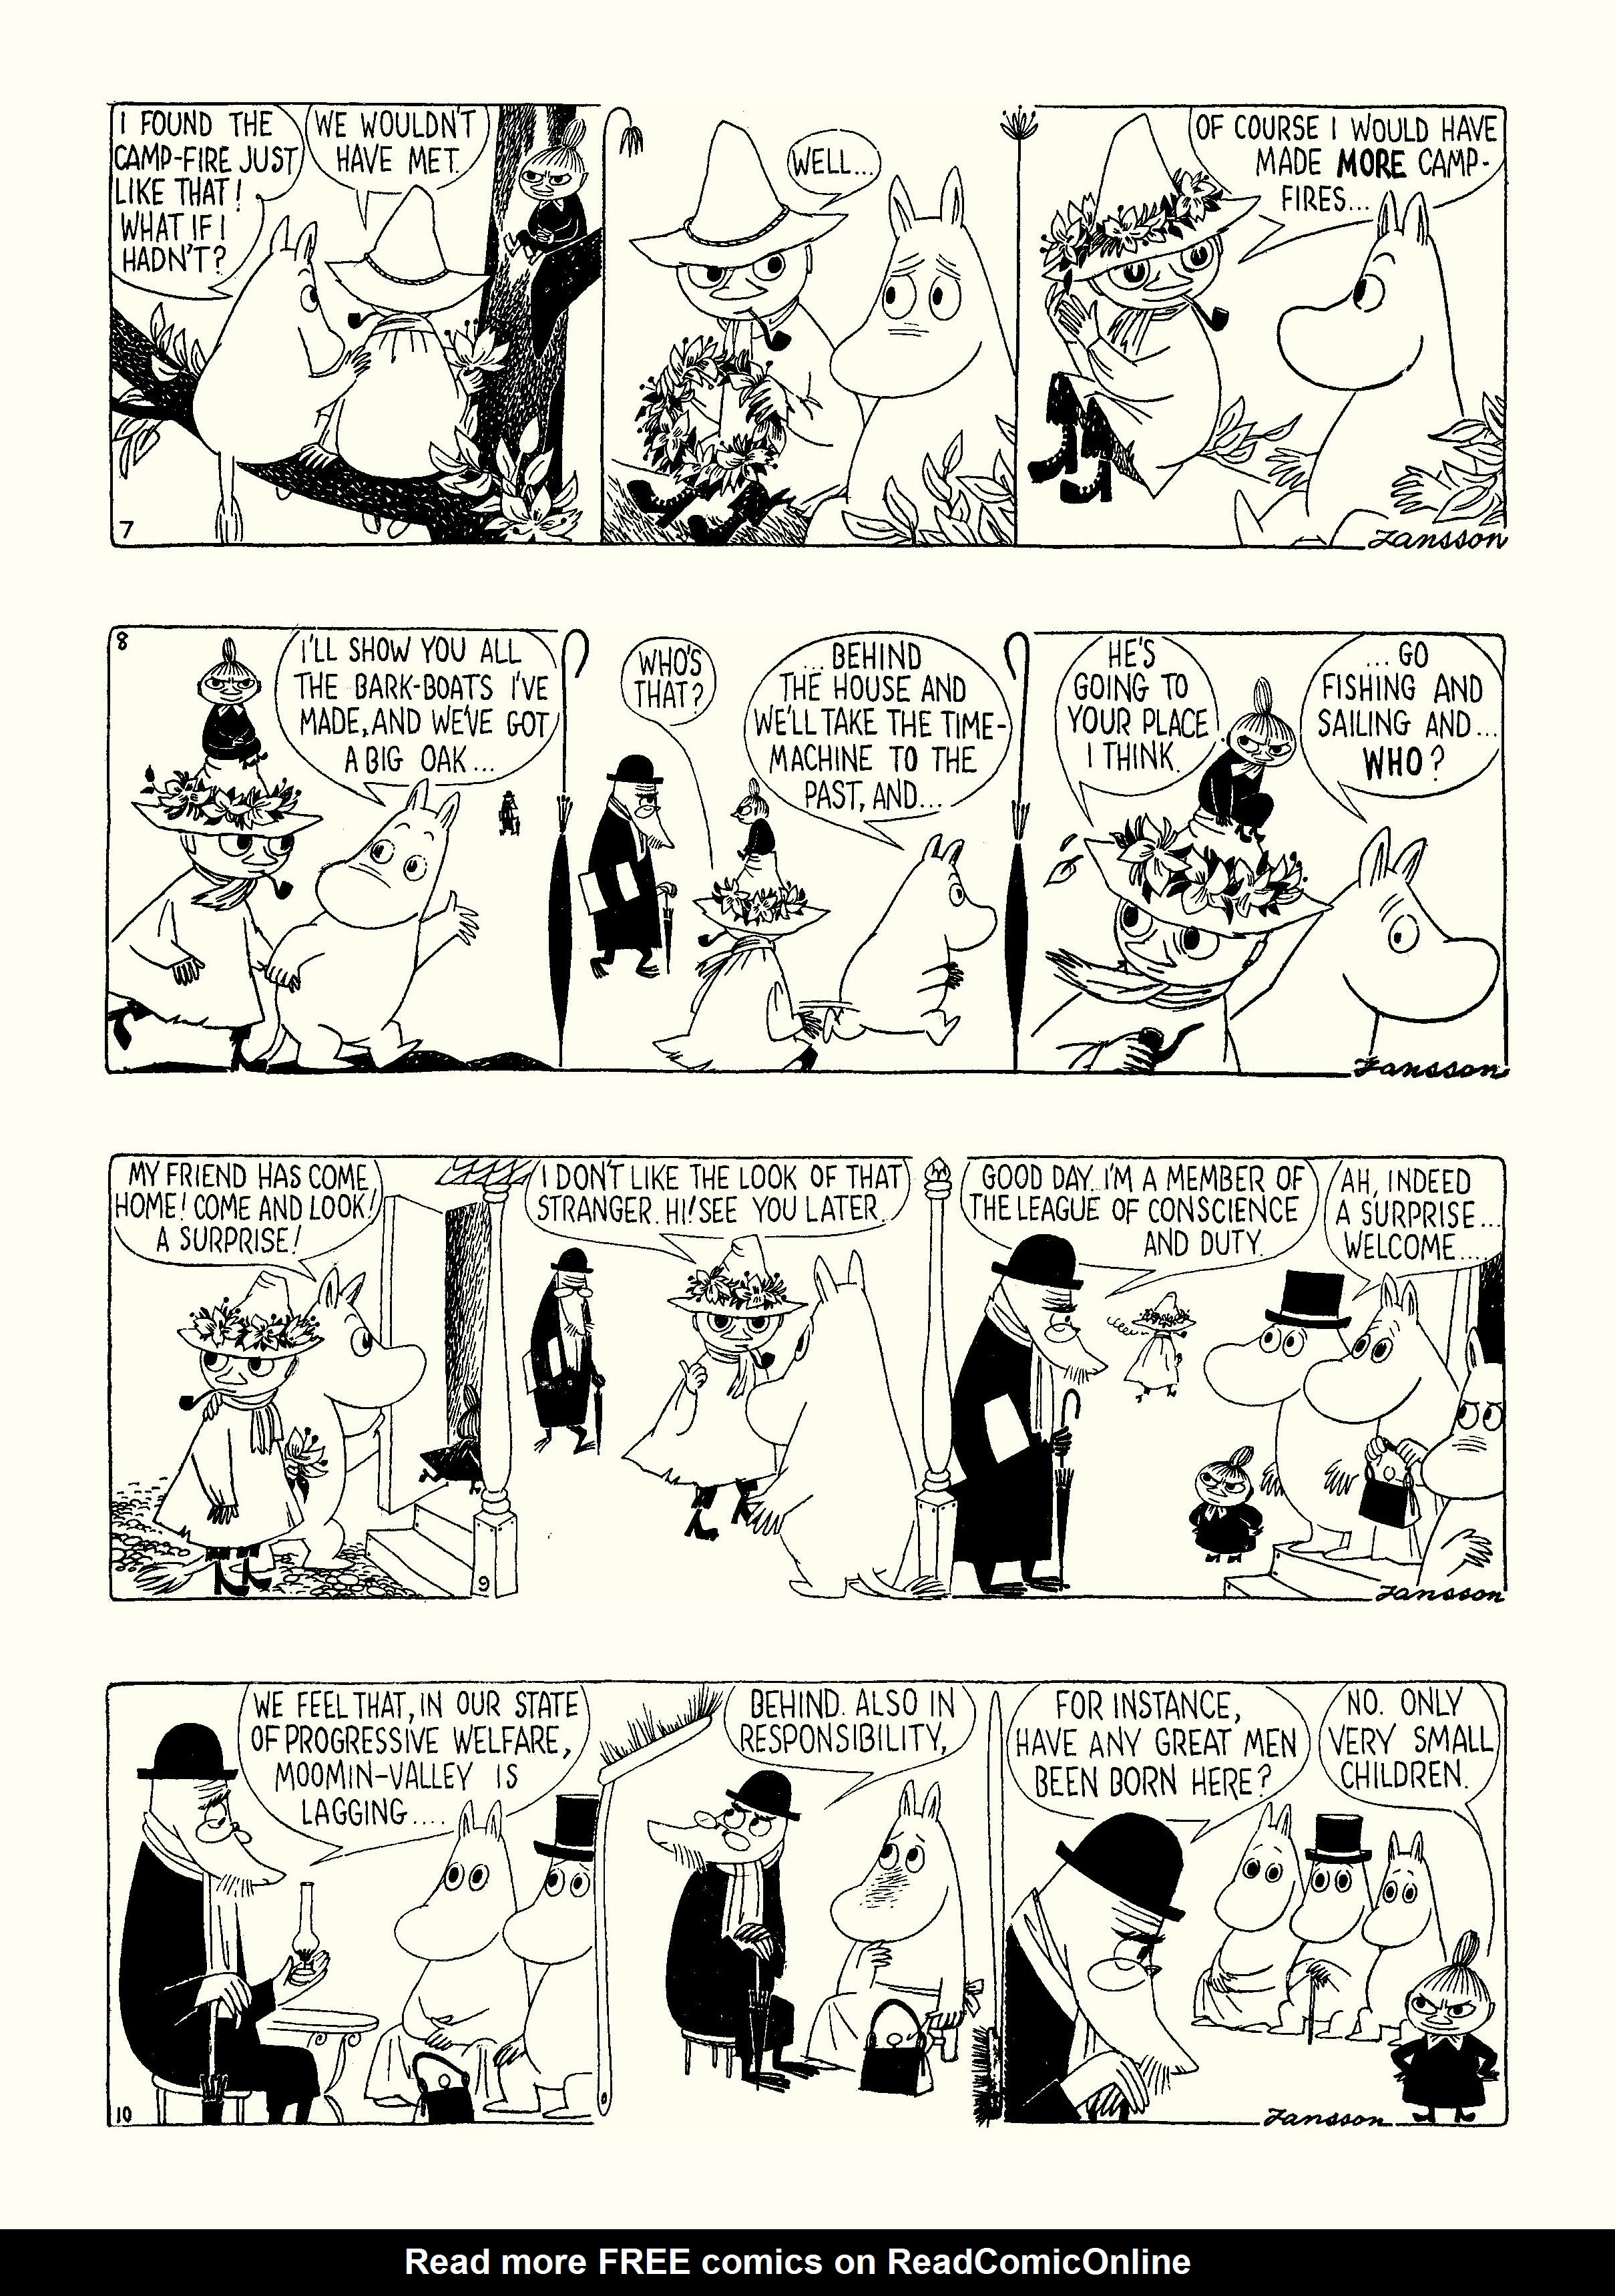 Read online Moomin: The Complete Tove Jansson Comic Strip comic -  Issue # TPB 4 - 39